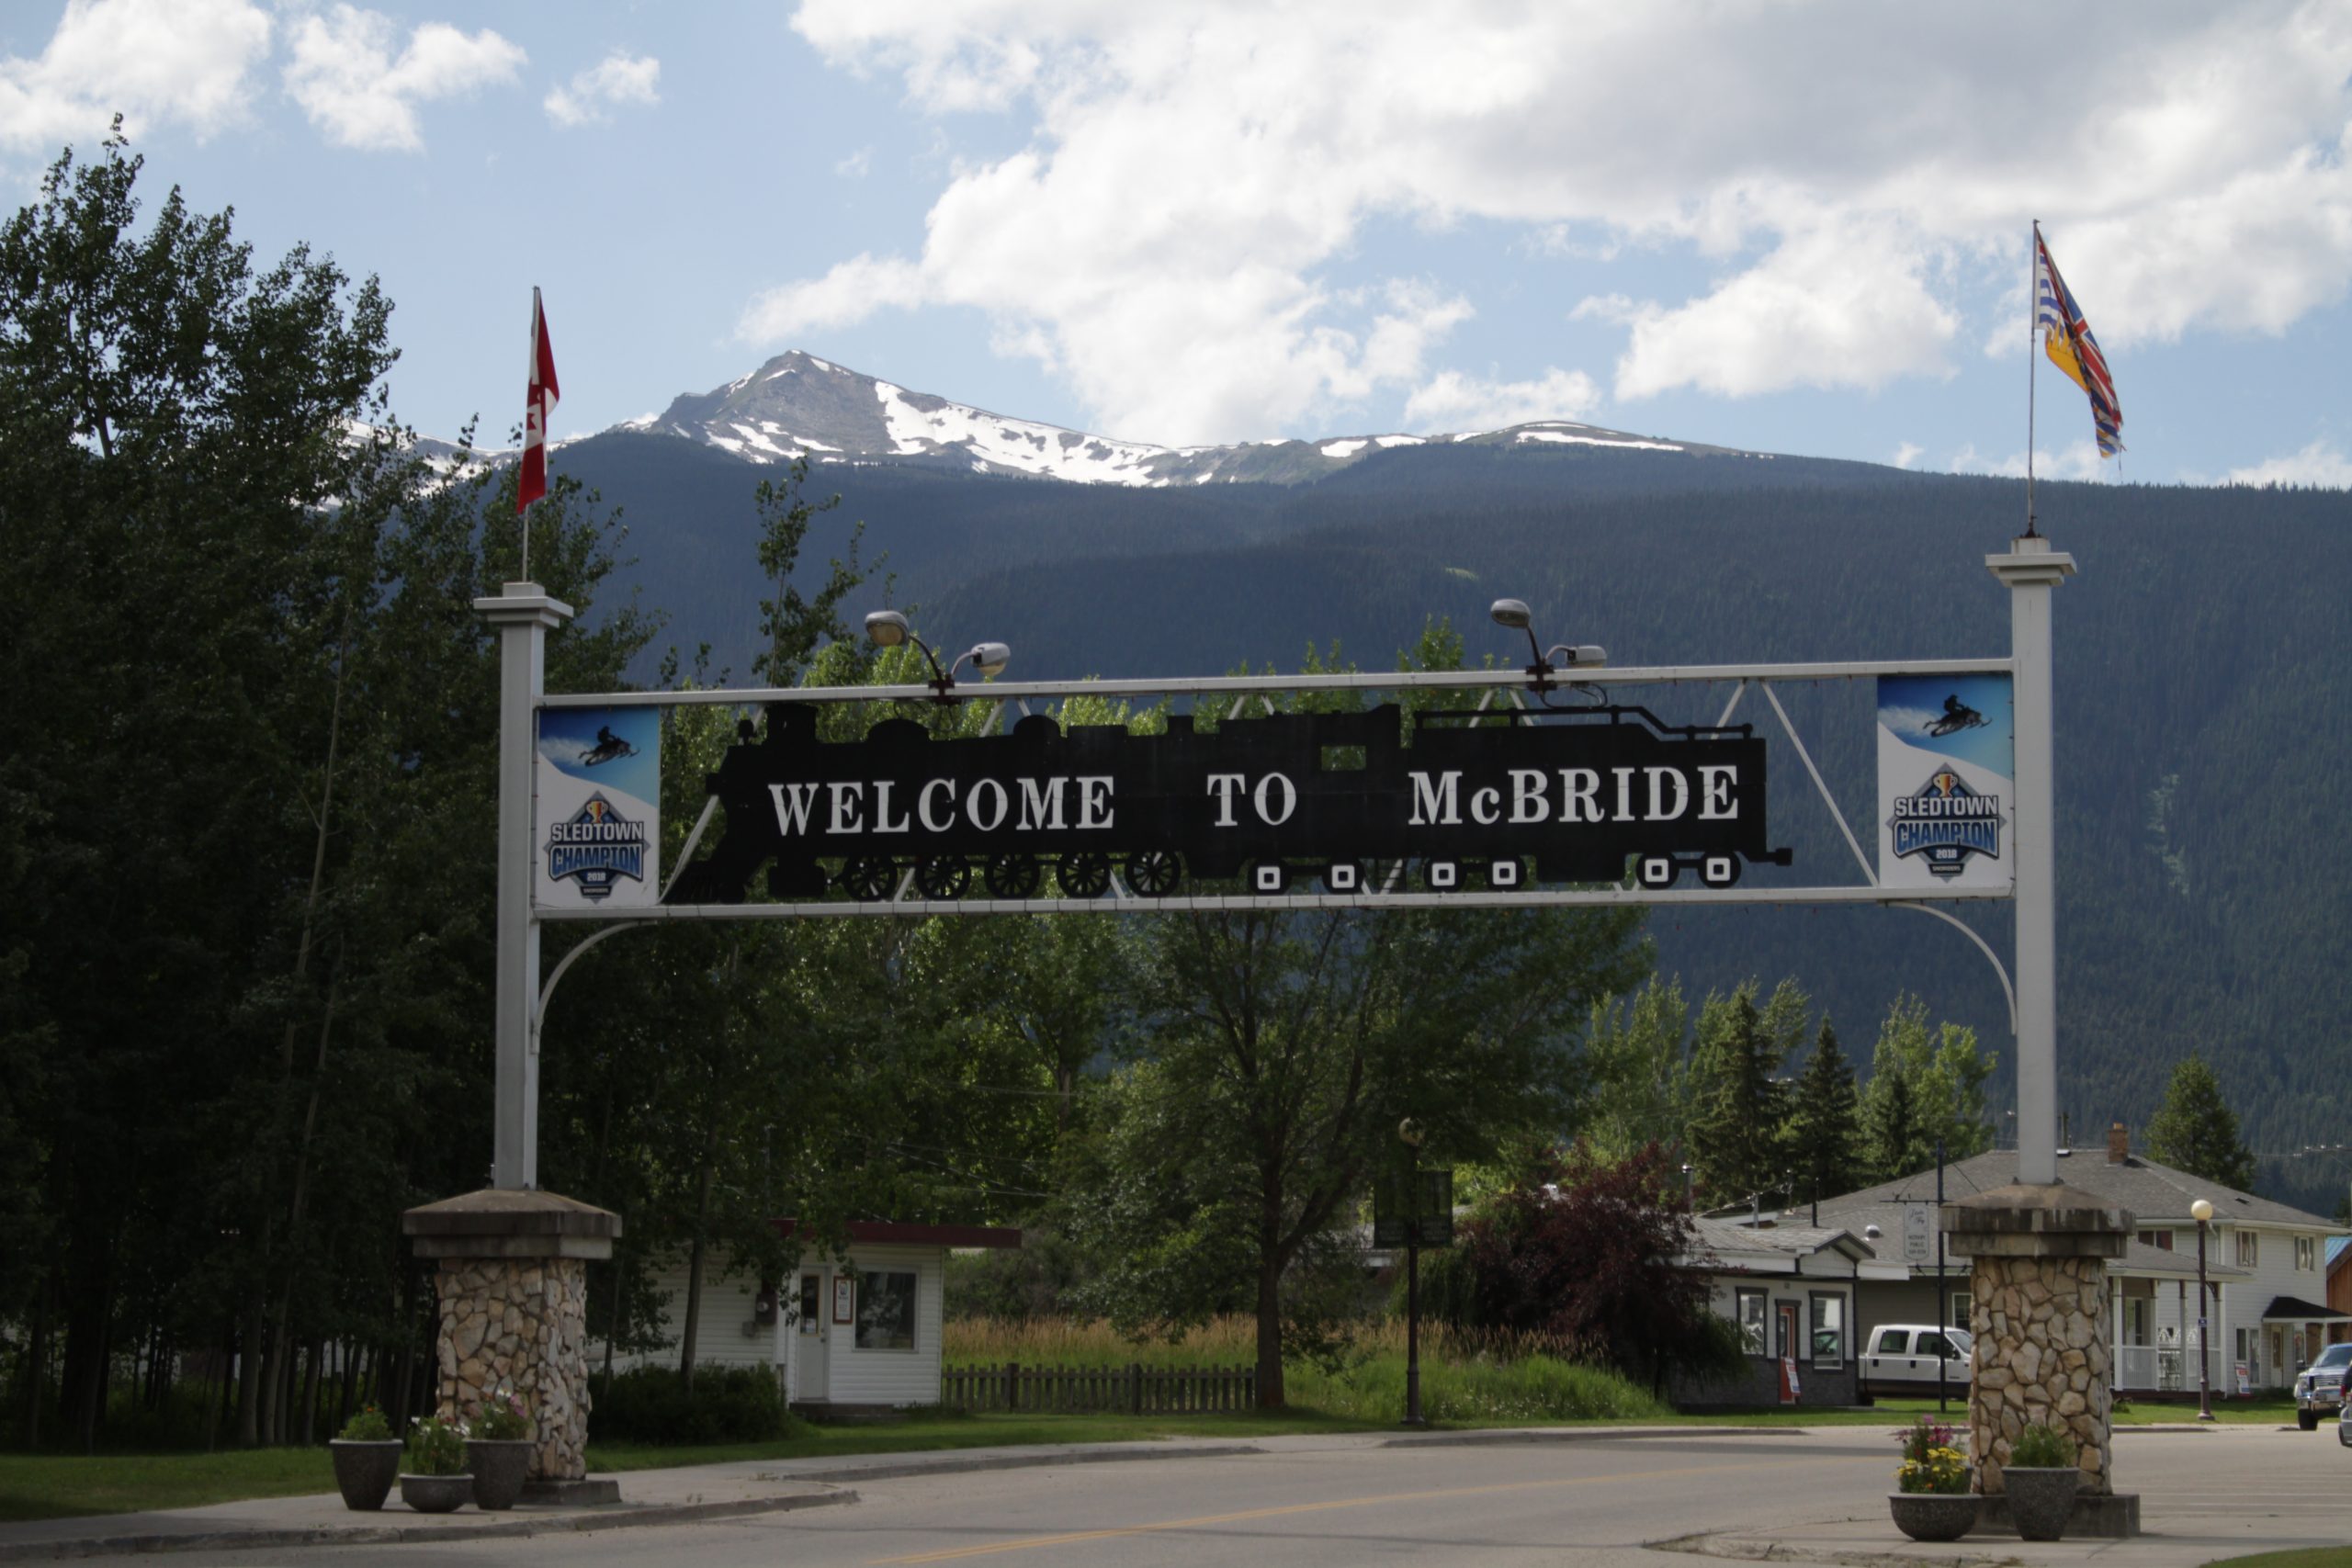 McBride Council – Anti Deactivation, Clean Water Coming, Censure Information Released